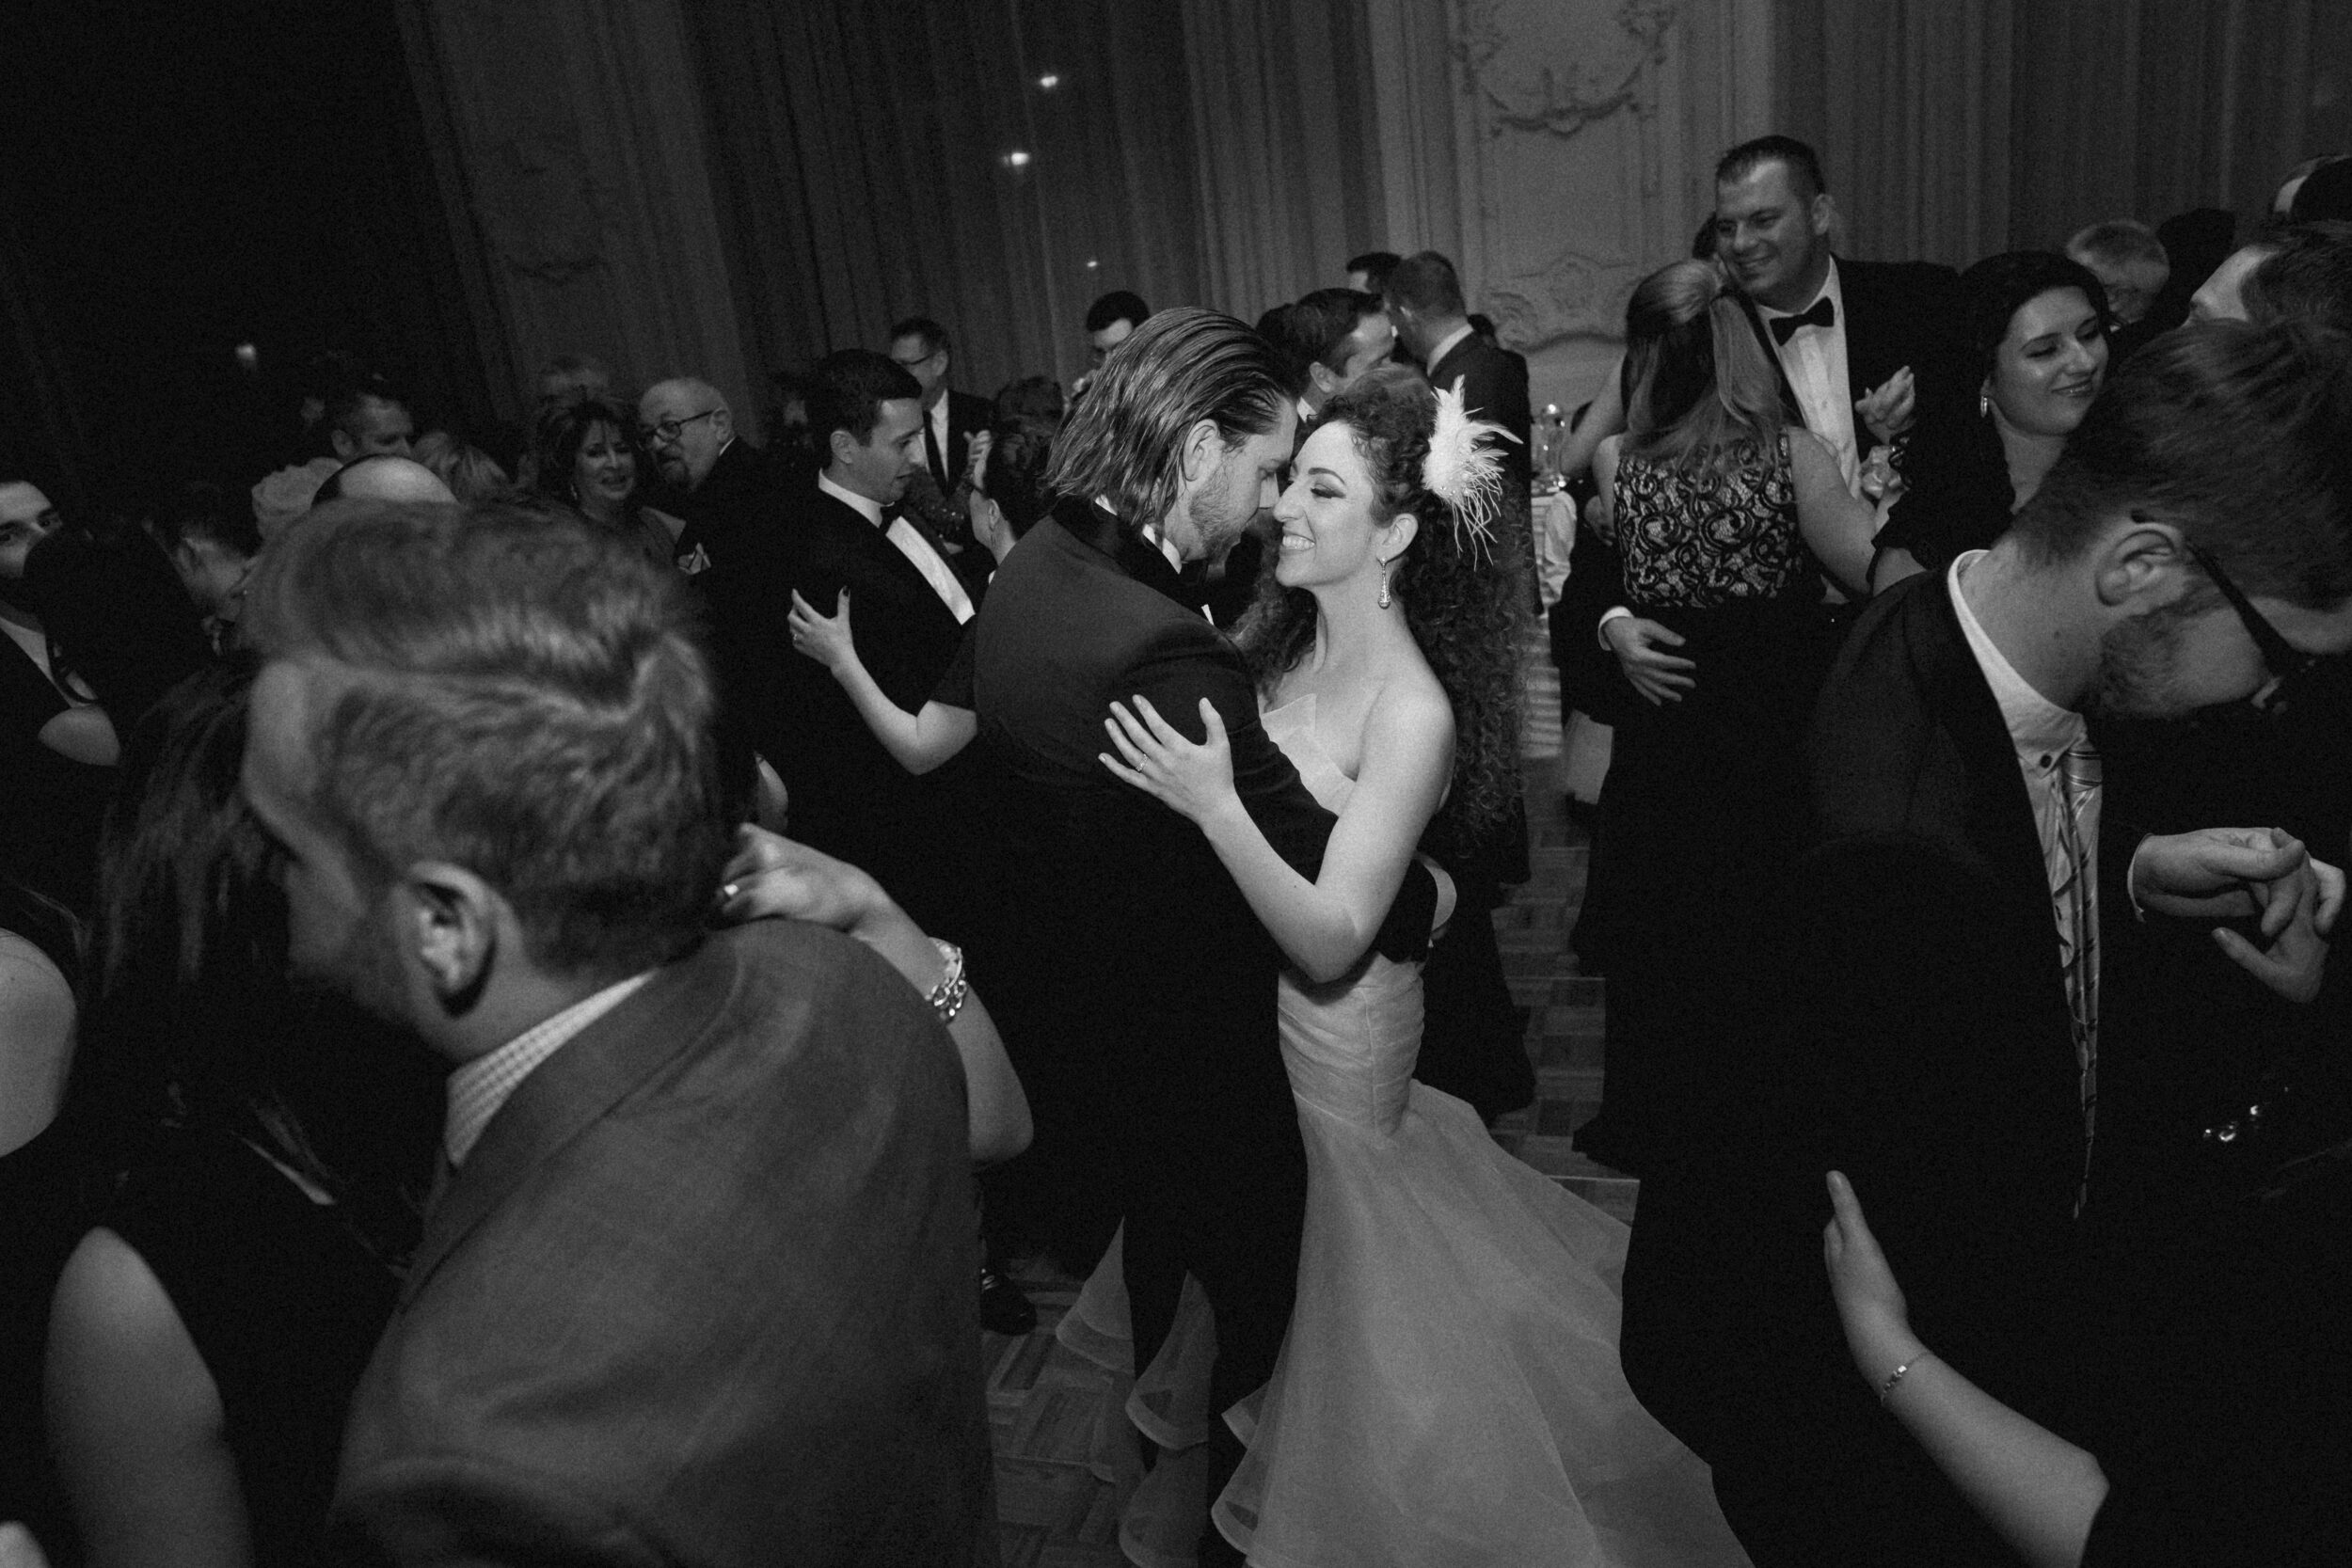 A couple enjoys their first dance during their intimate Toronto wedding.